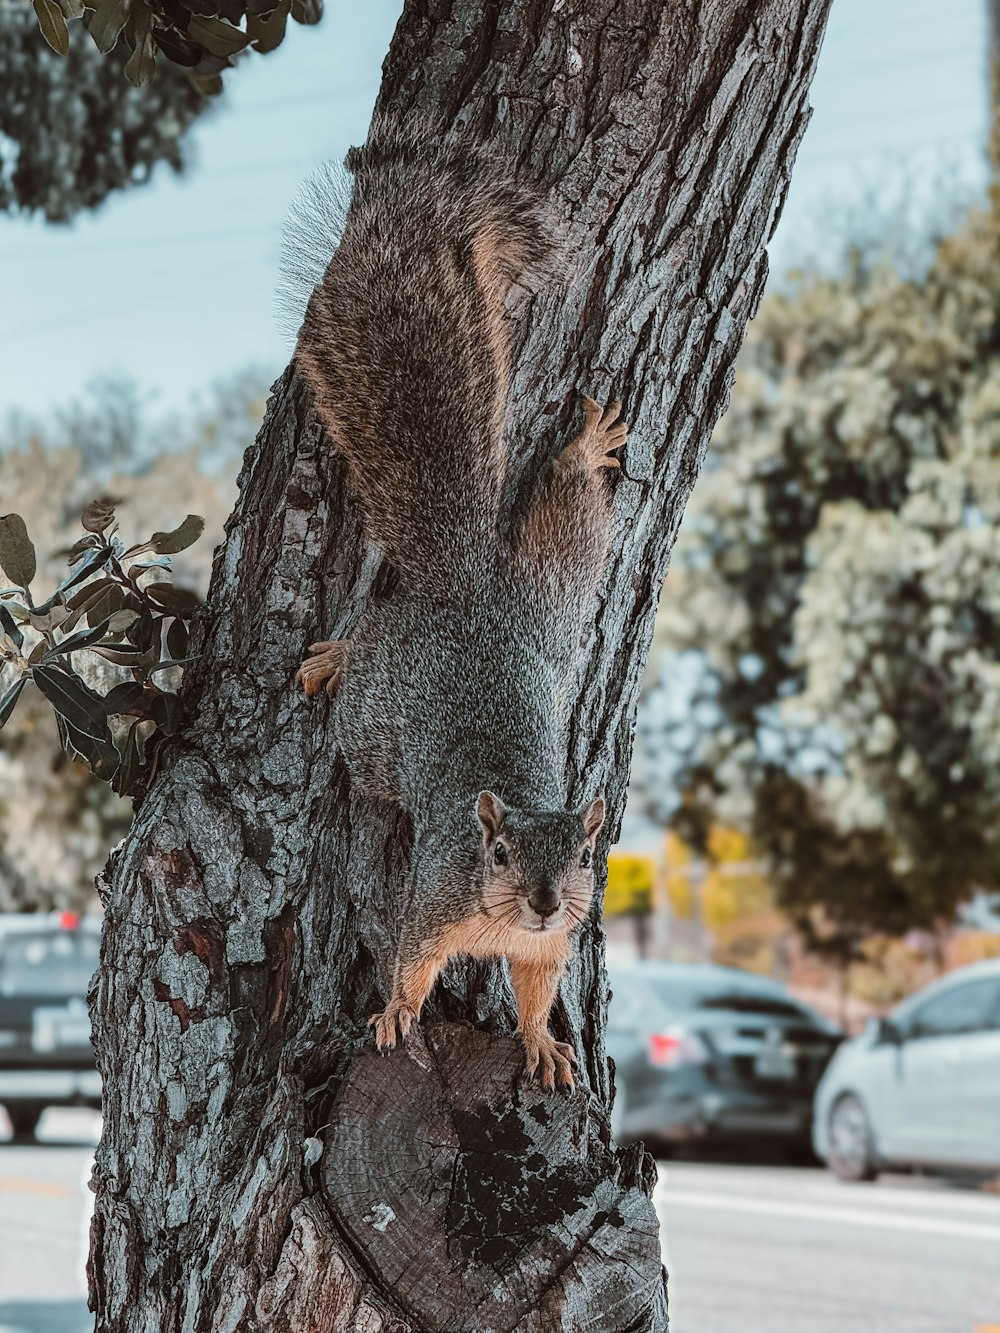 a squirrel is sitting on the bark of a tree